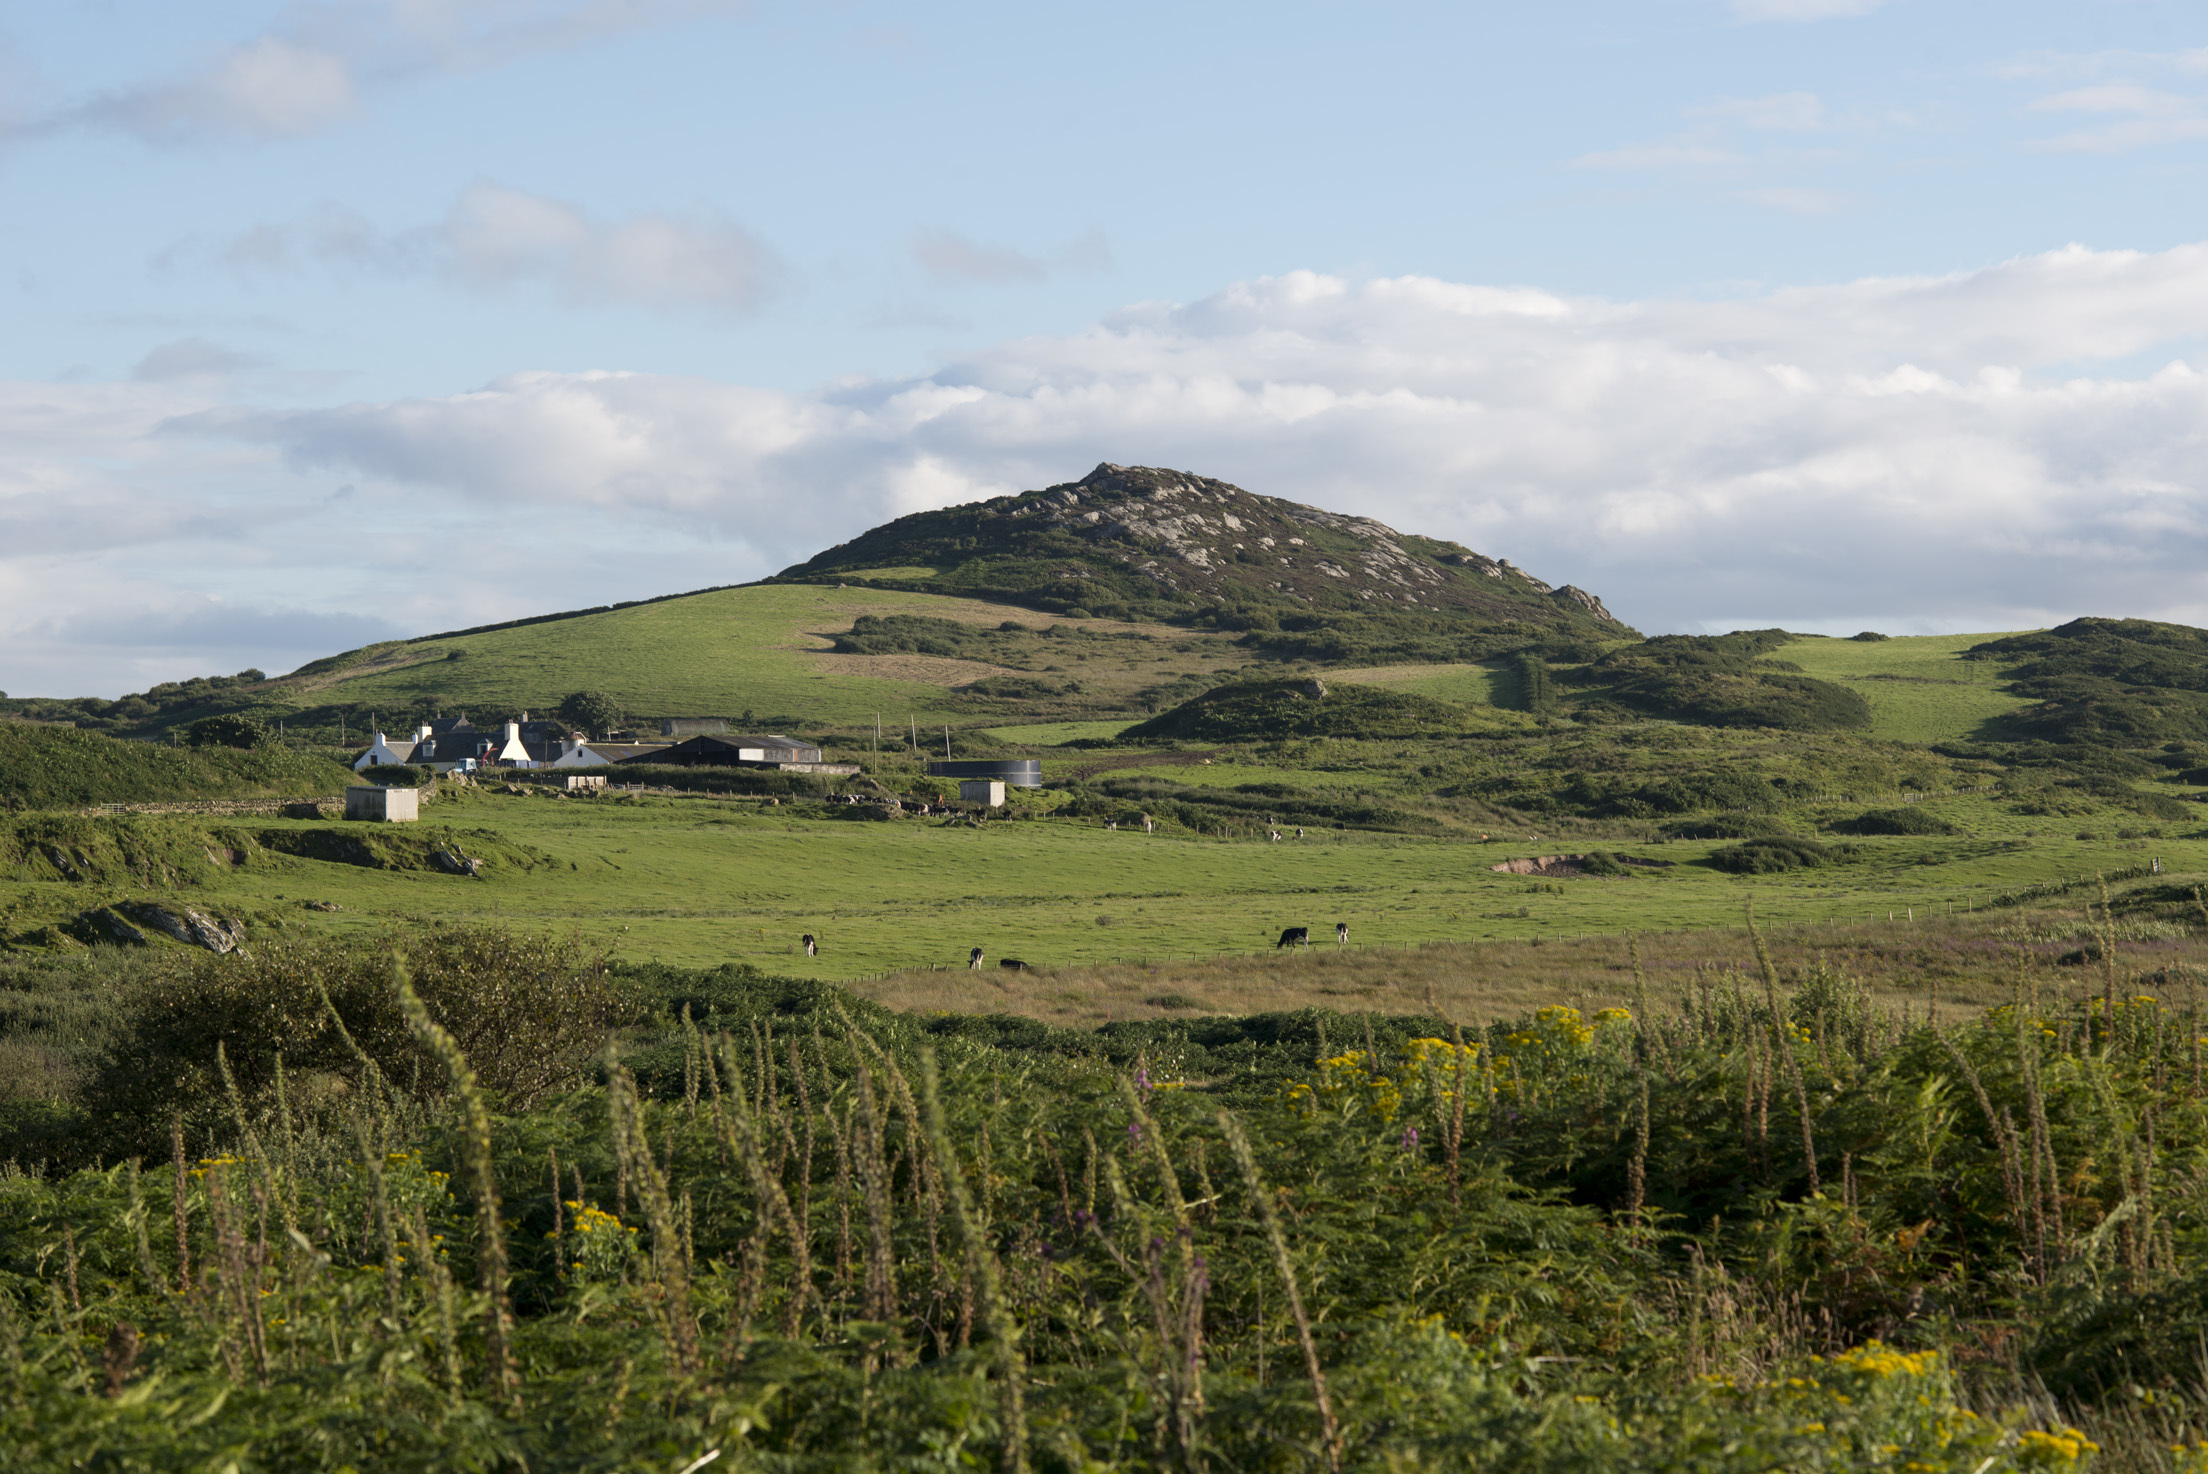 The little farm on the isle of Gigha is home to the Wee Isle Dairy